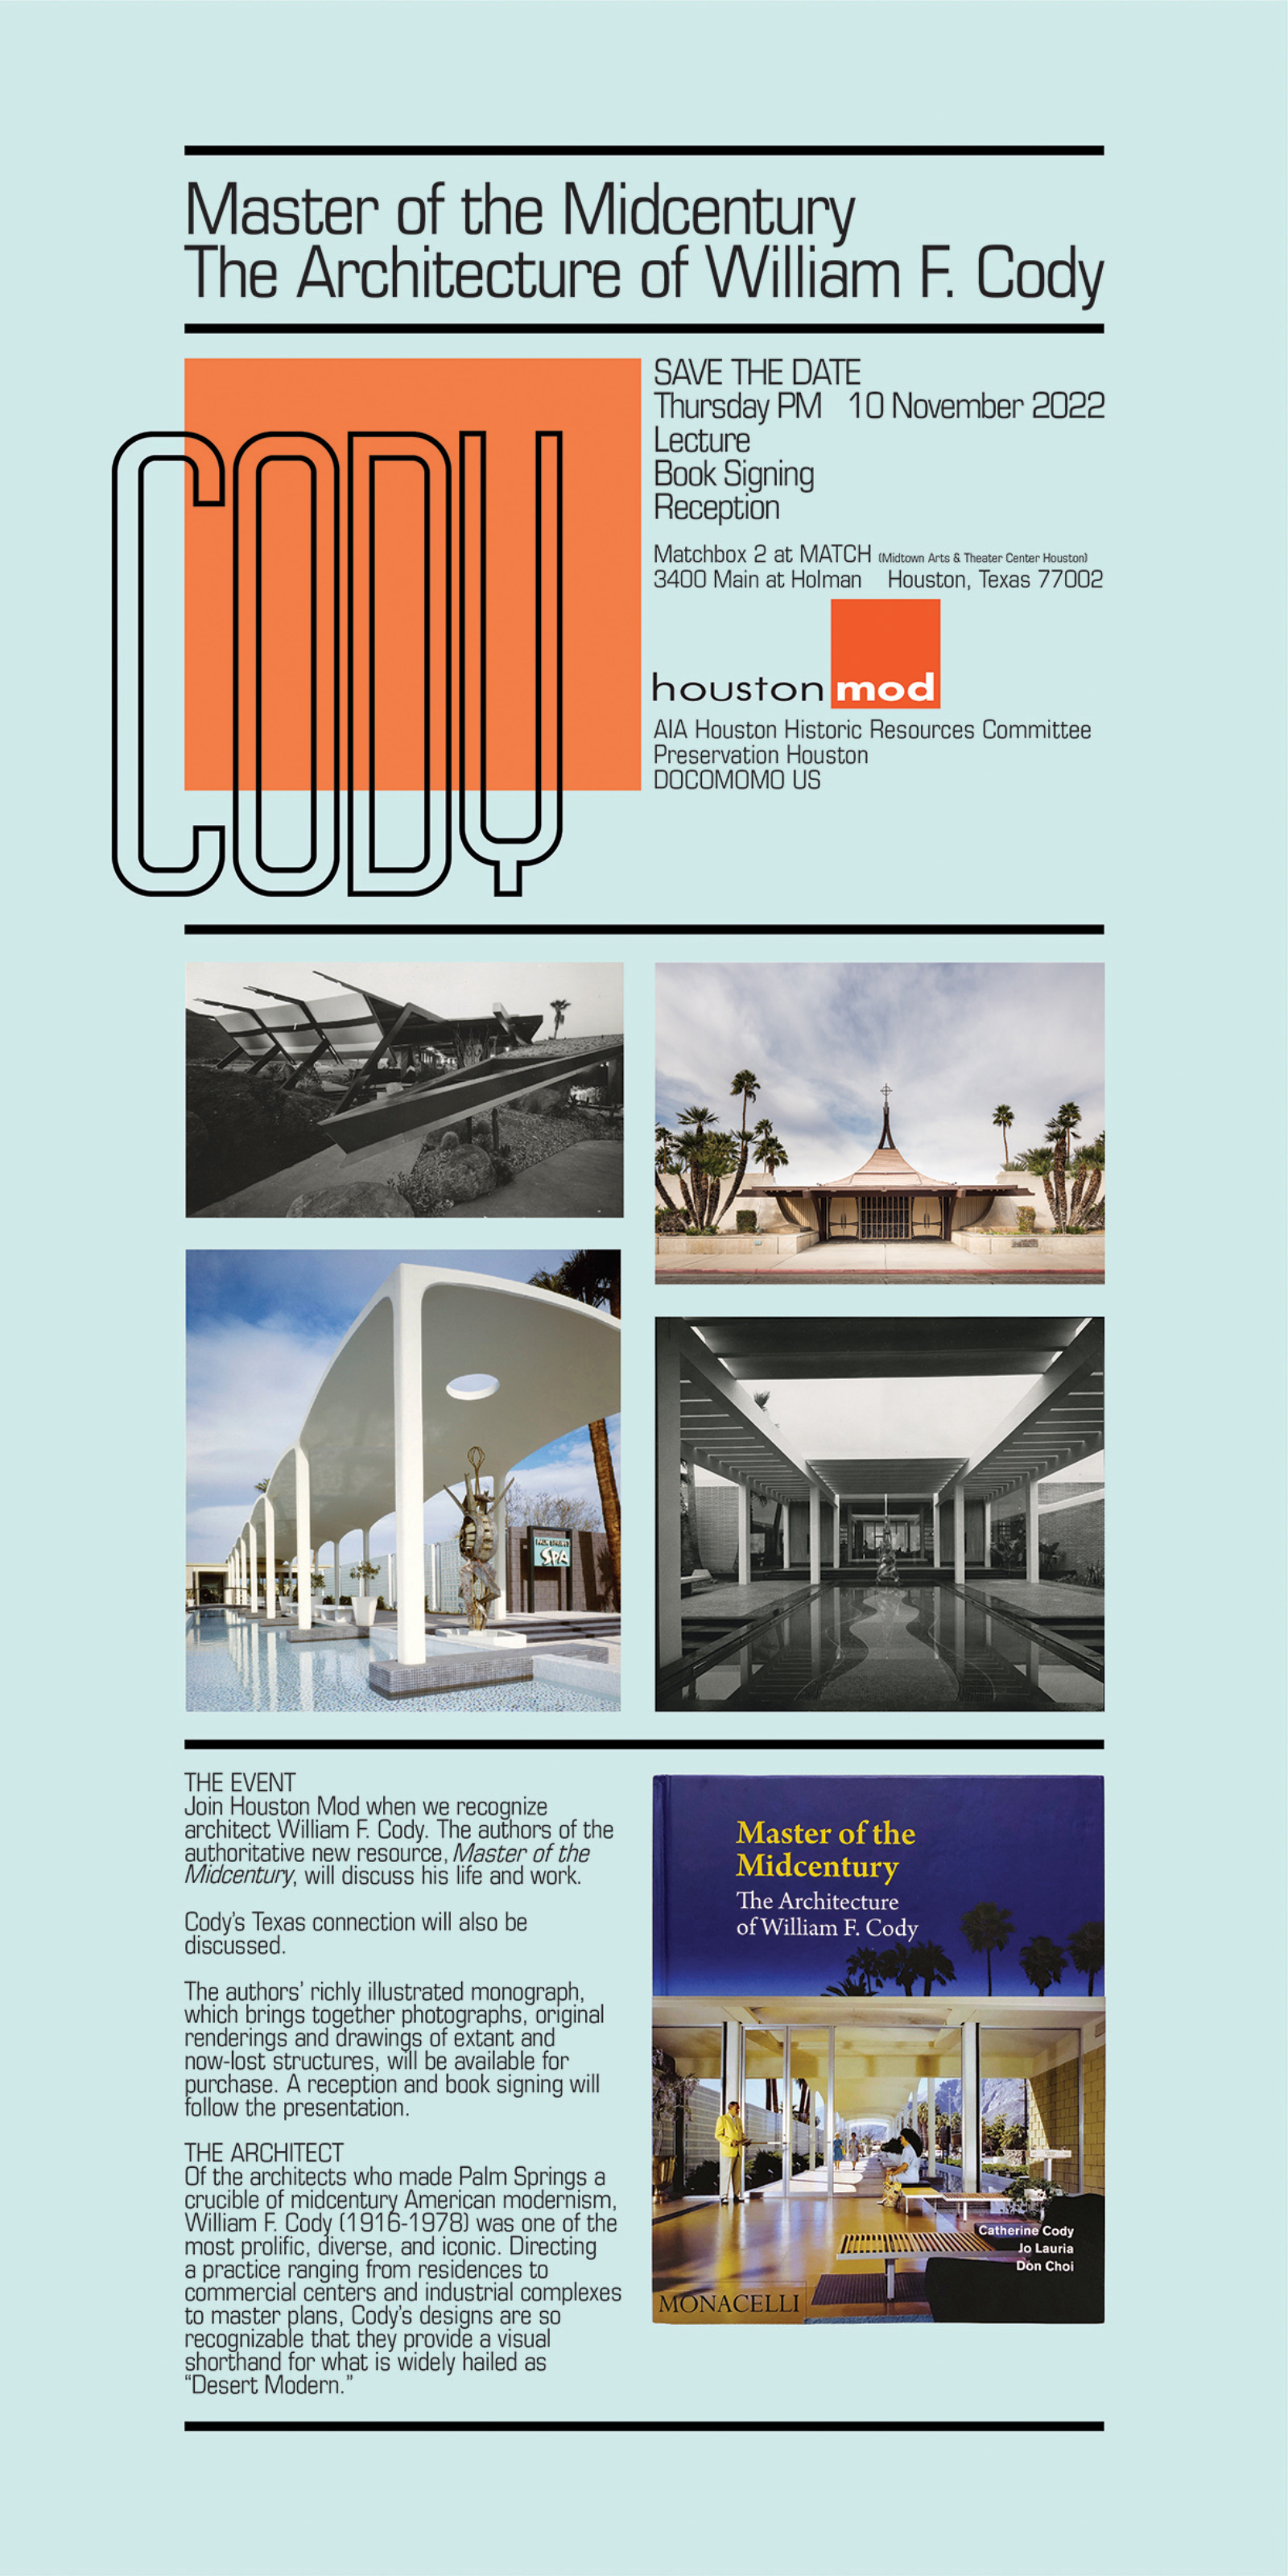 Master of the Midcentury event flyer